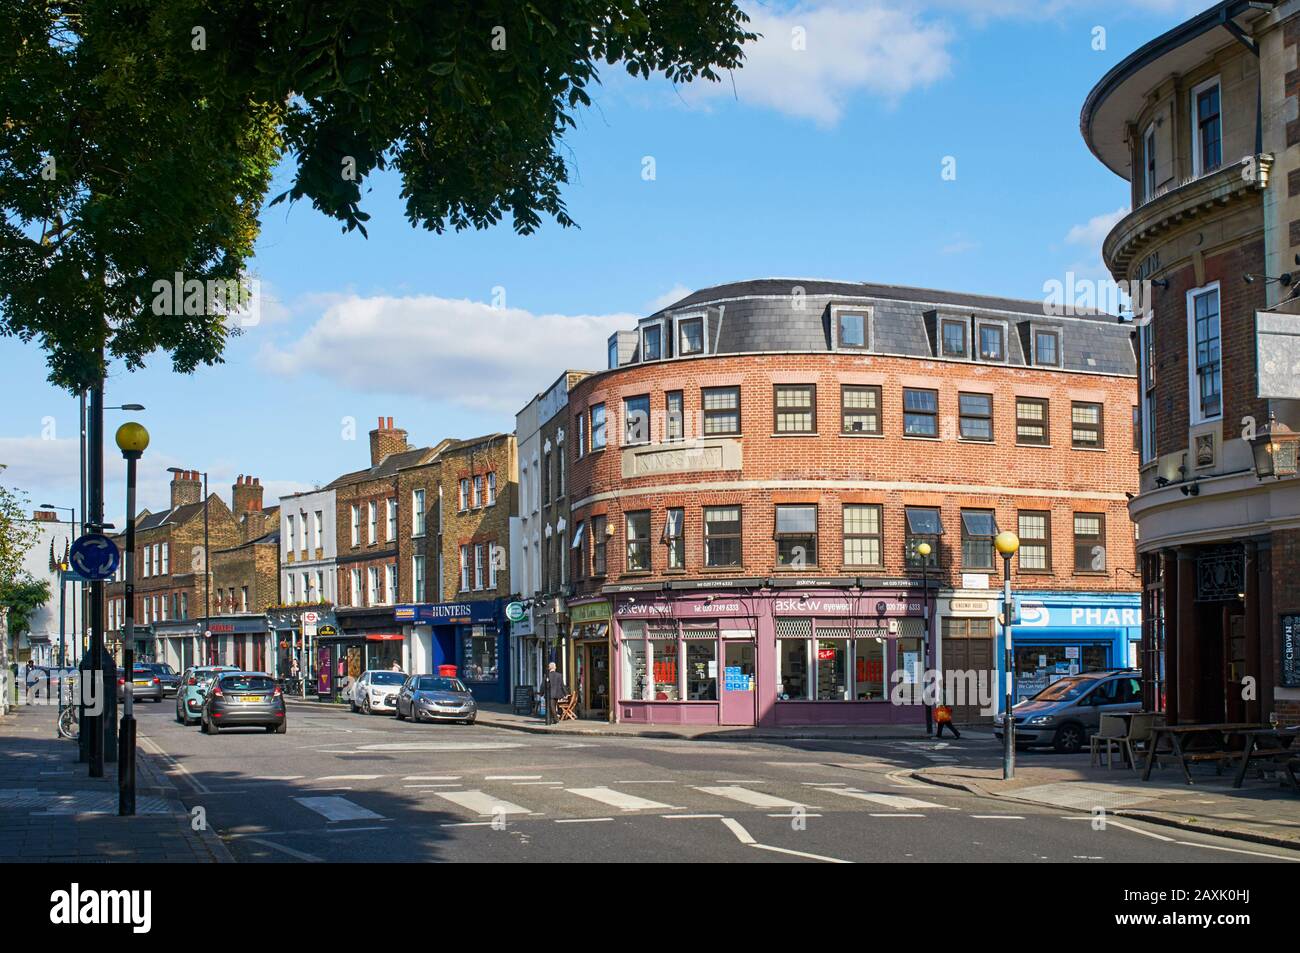 Stoke Newington Church Street, North London UK, with cafes and shops Stock Photo